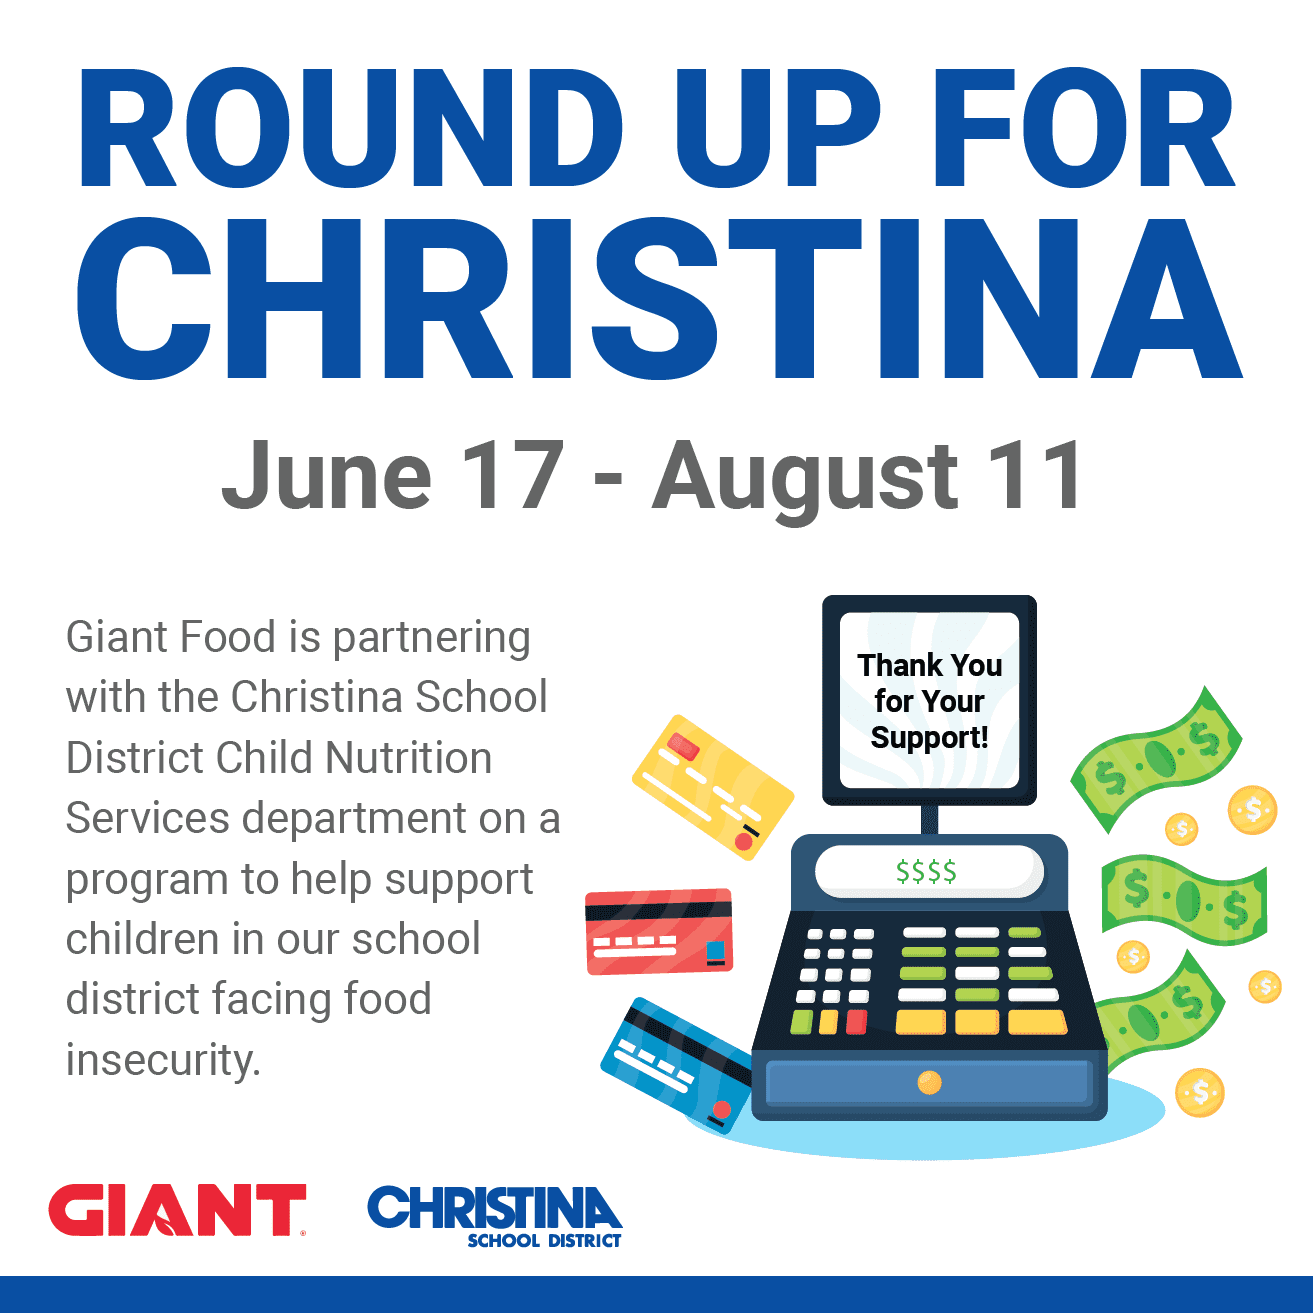 "Round up for Christina" initiative will end Aug. 11.